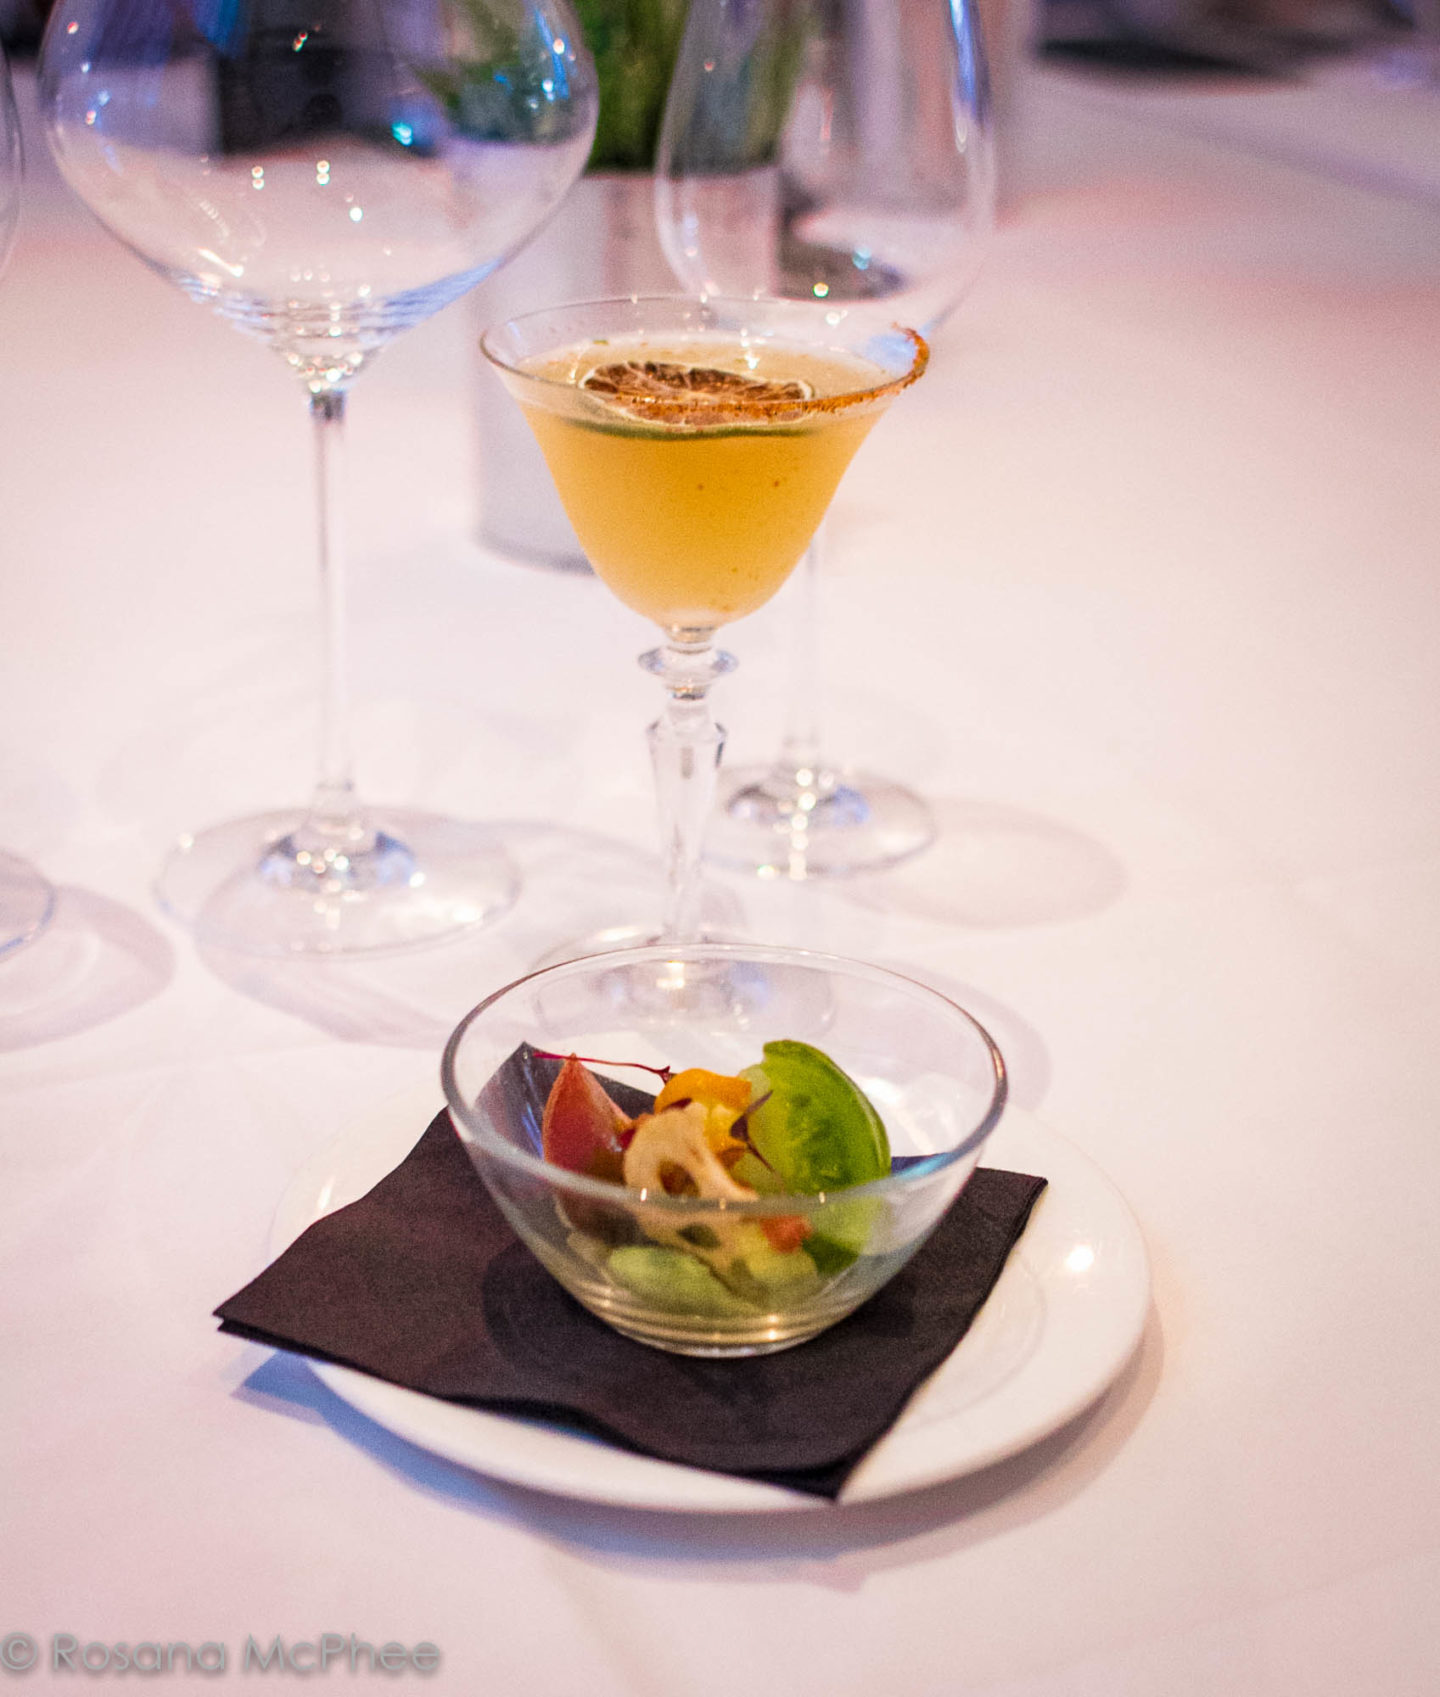 baby heritage tomato, avocado mousse and spicy kumquat at Avenue London